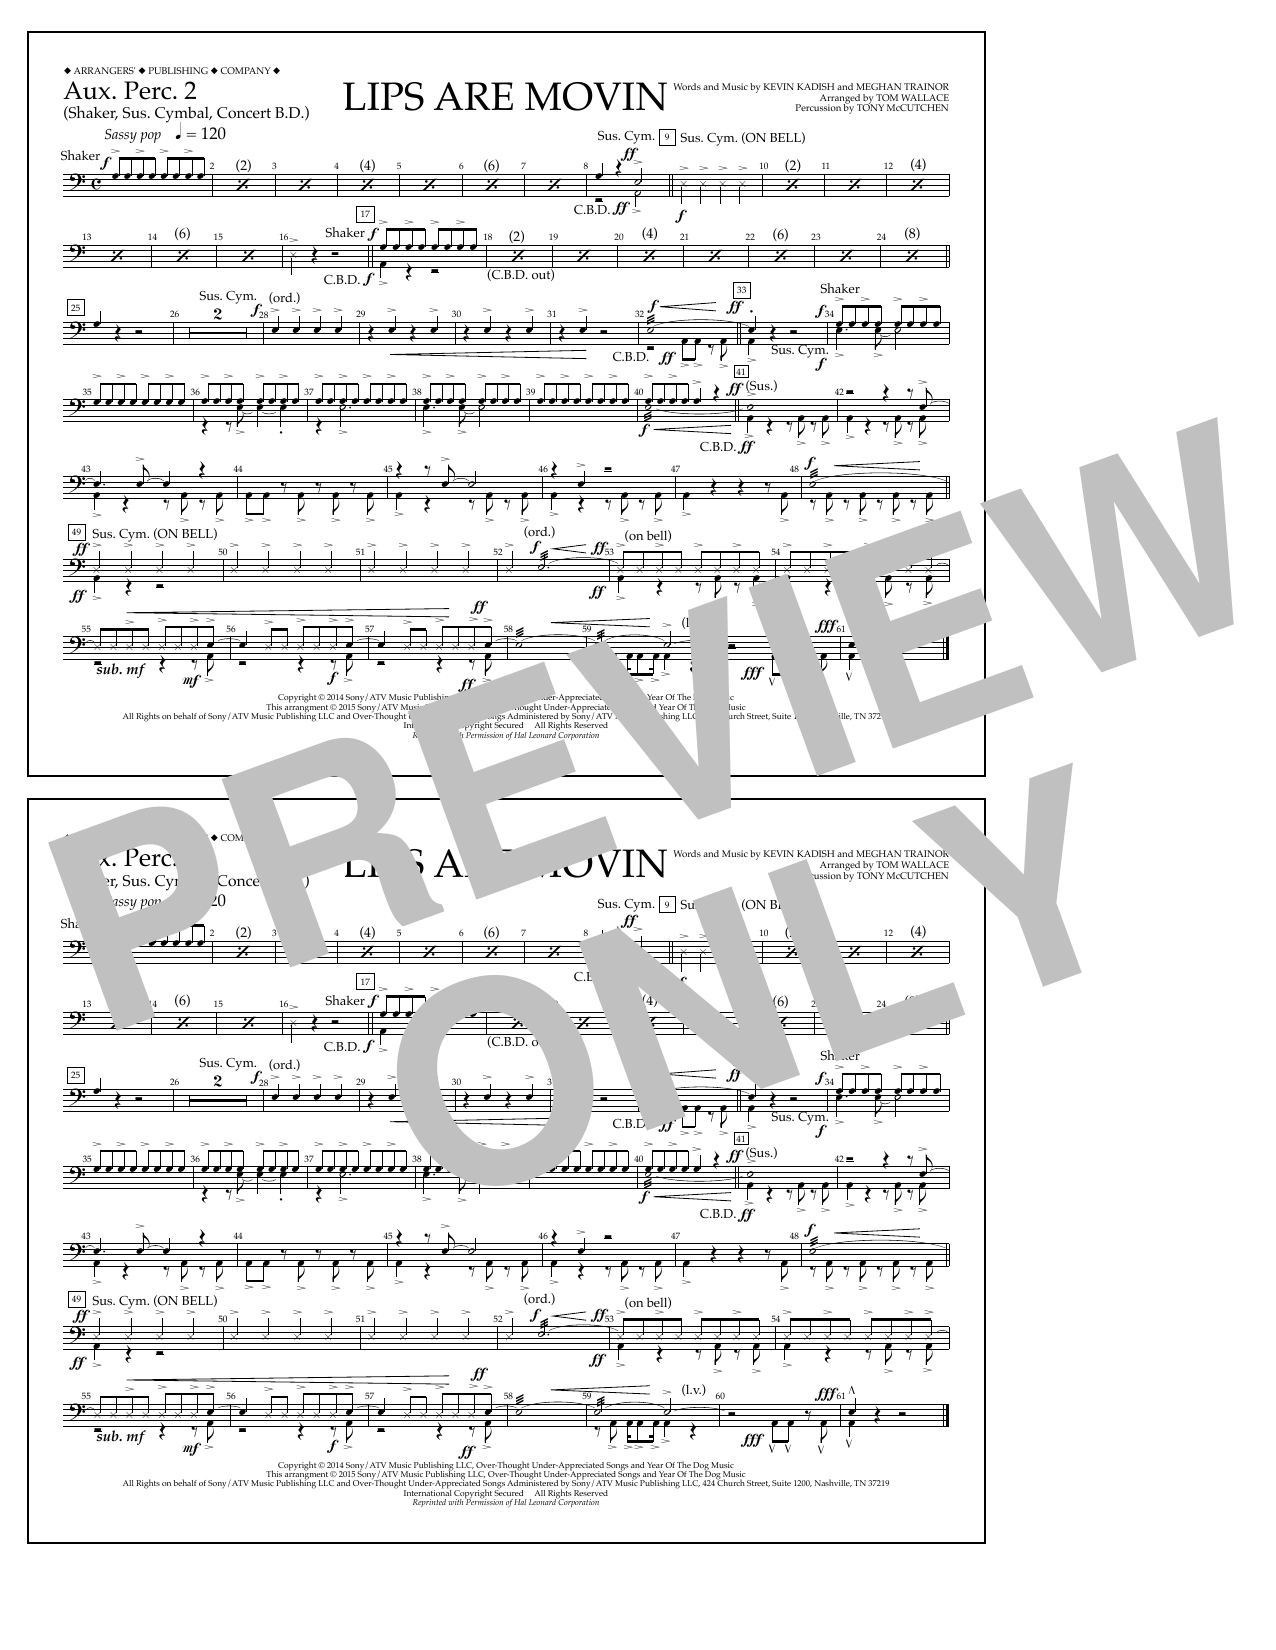 Download Tom Wallace Lips Are Movin - Aux. Perc. 2 Sheet Music